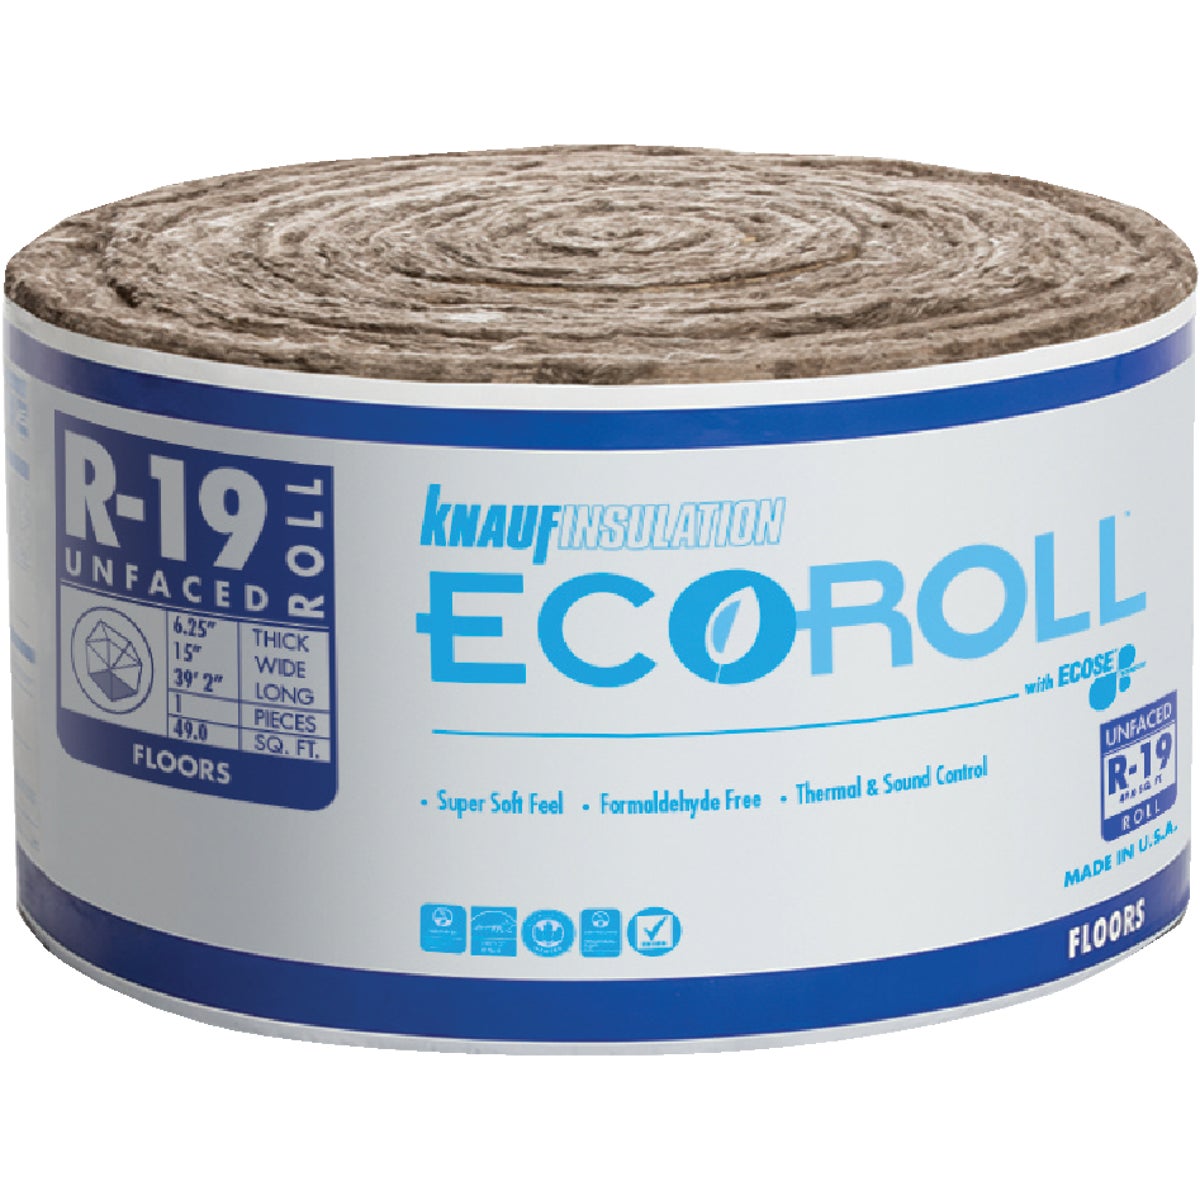 Item 100619, ECOSE Technology is a revolutionary binder chemistry that makes Knauf 